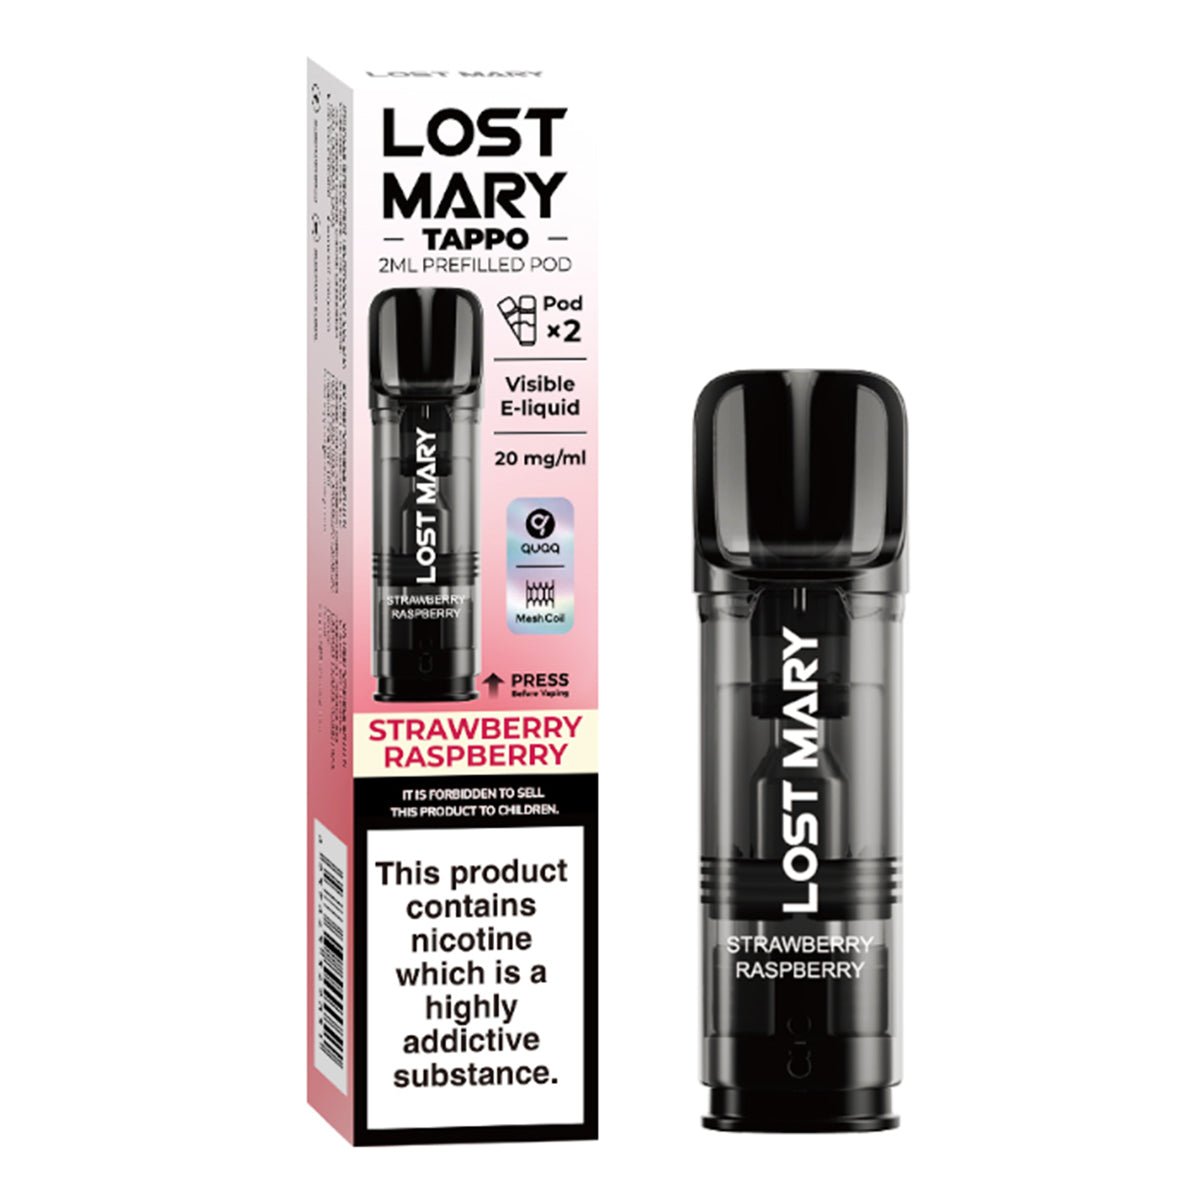 Strawberry Raspberry Tappo Pre-filled Pod by Lost Mary - Prime Vapes UK